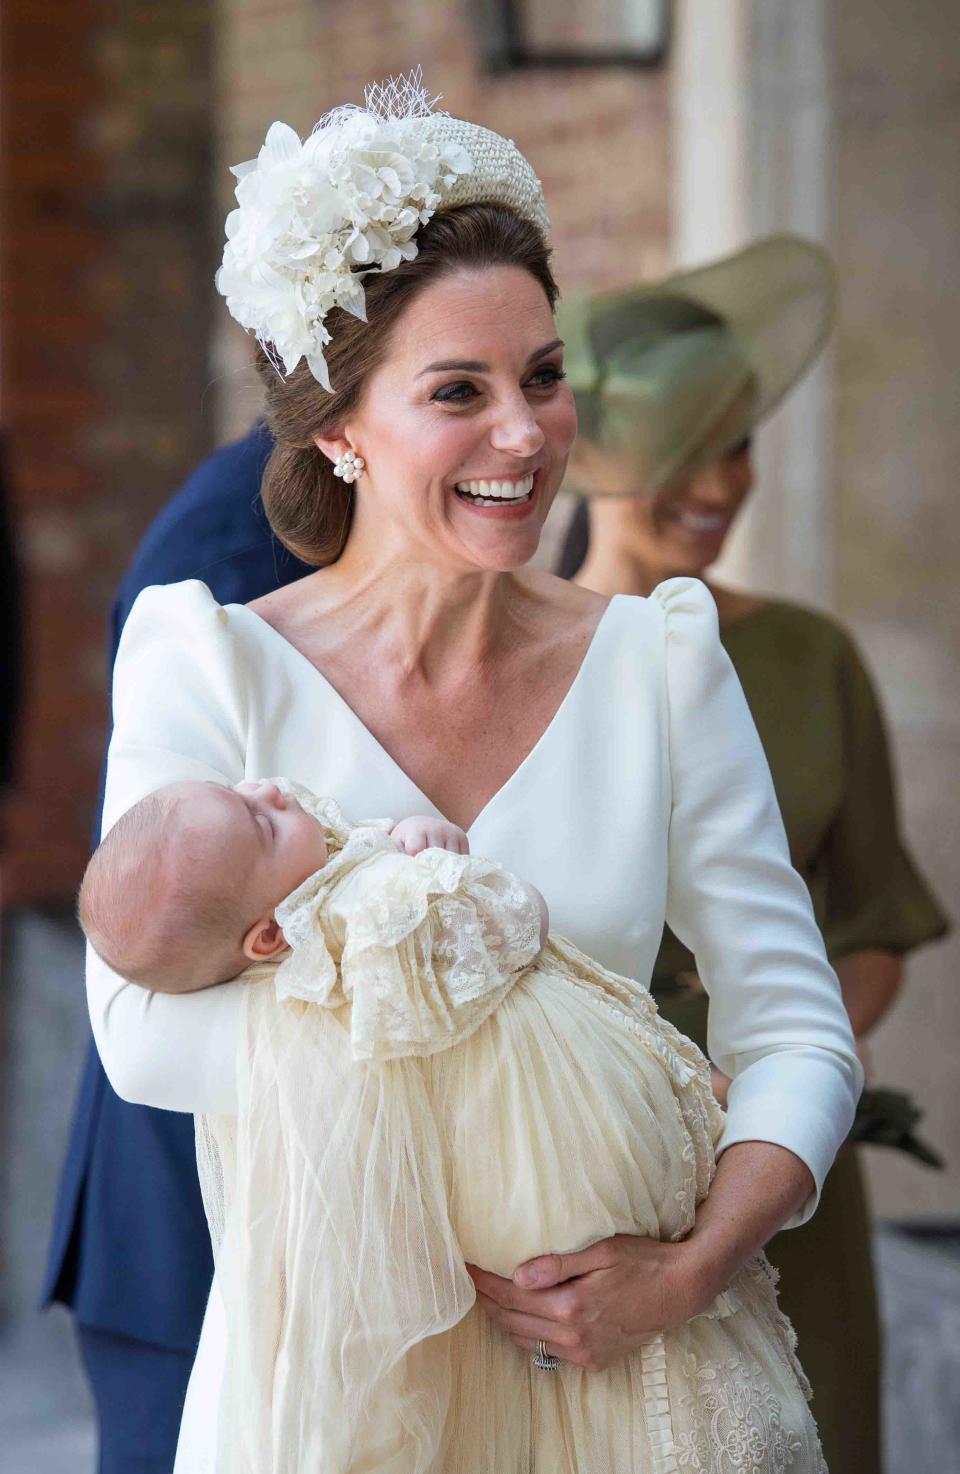 Kate was all smiles at Prince Louis’ christening. Photo: Getty